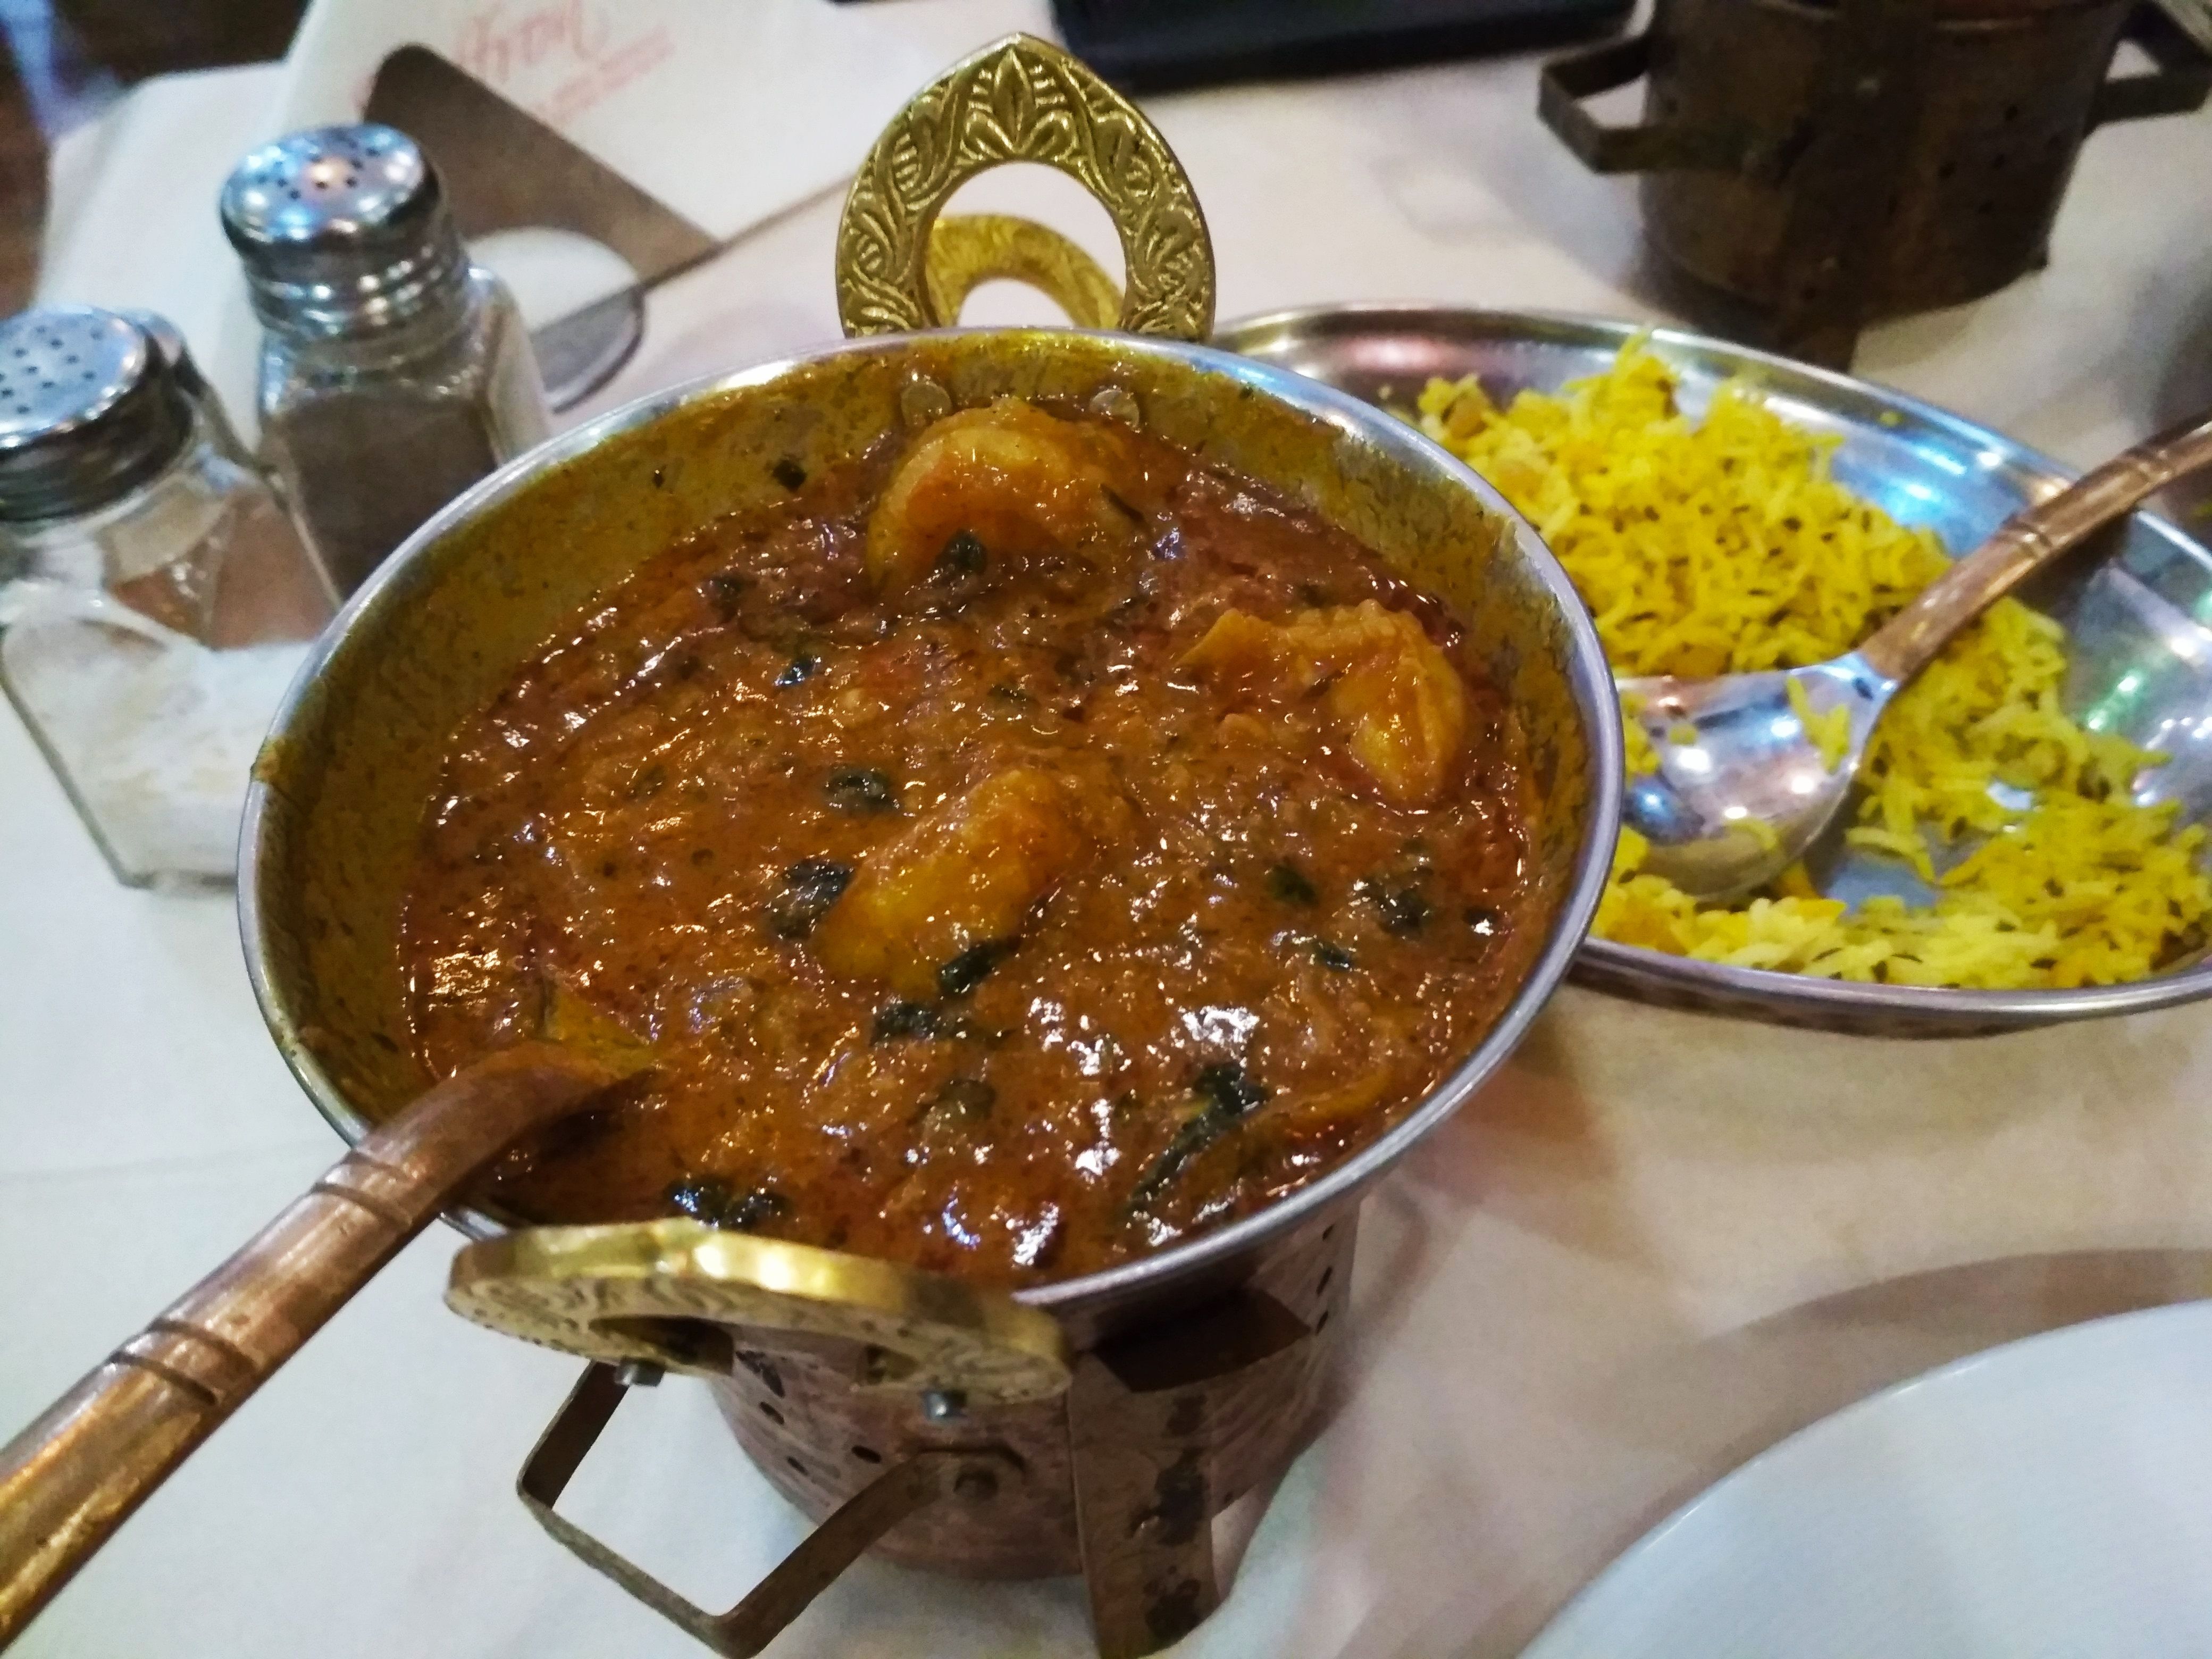 Caption: A photo of a bowl of curry sauce with prawns and a bowl of yellow rice in the background at Saffron Indian restaurant in Sofia, Bulgaria. (Local Guide @DeniGu)